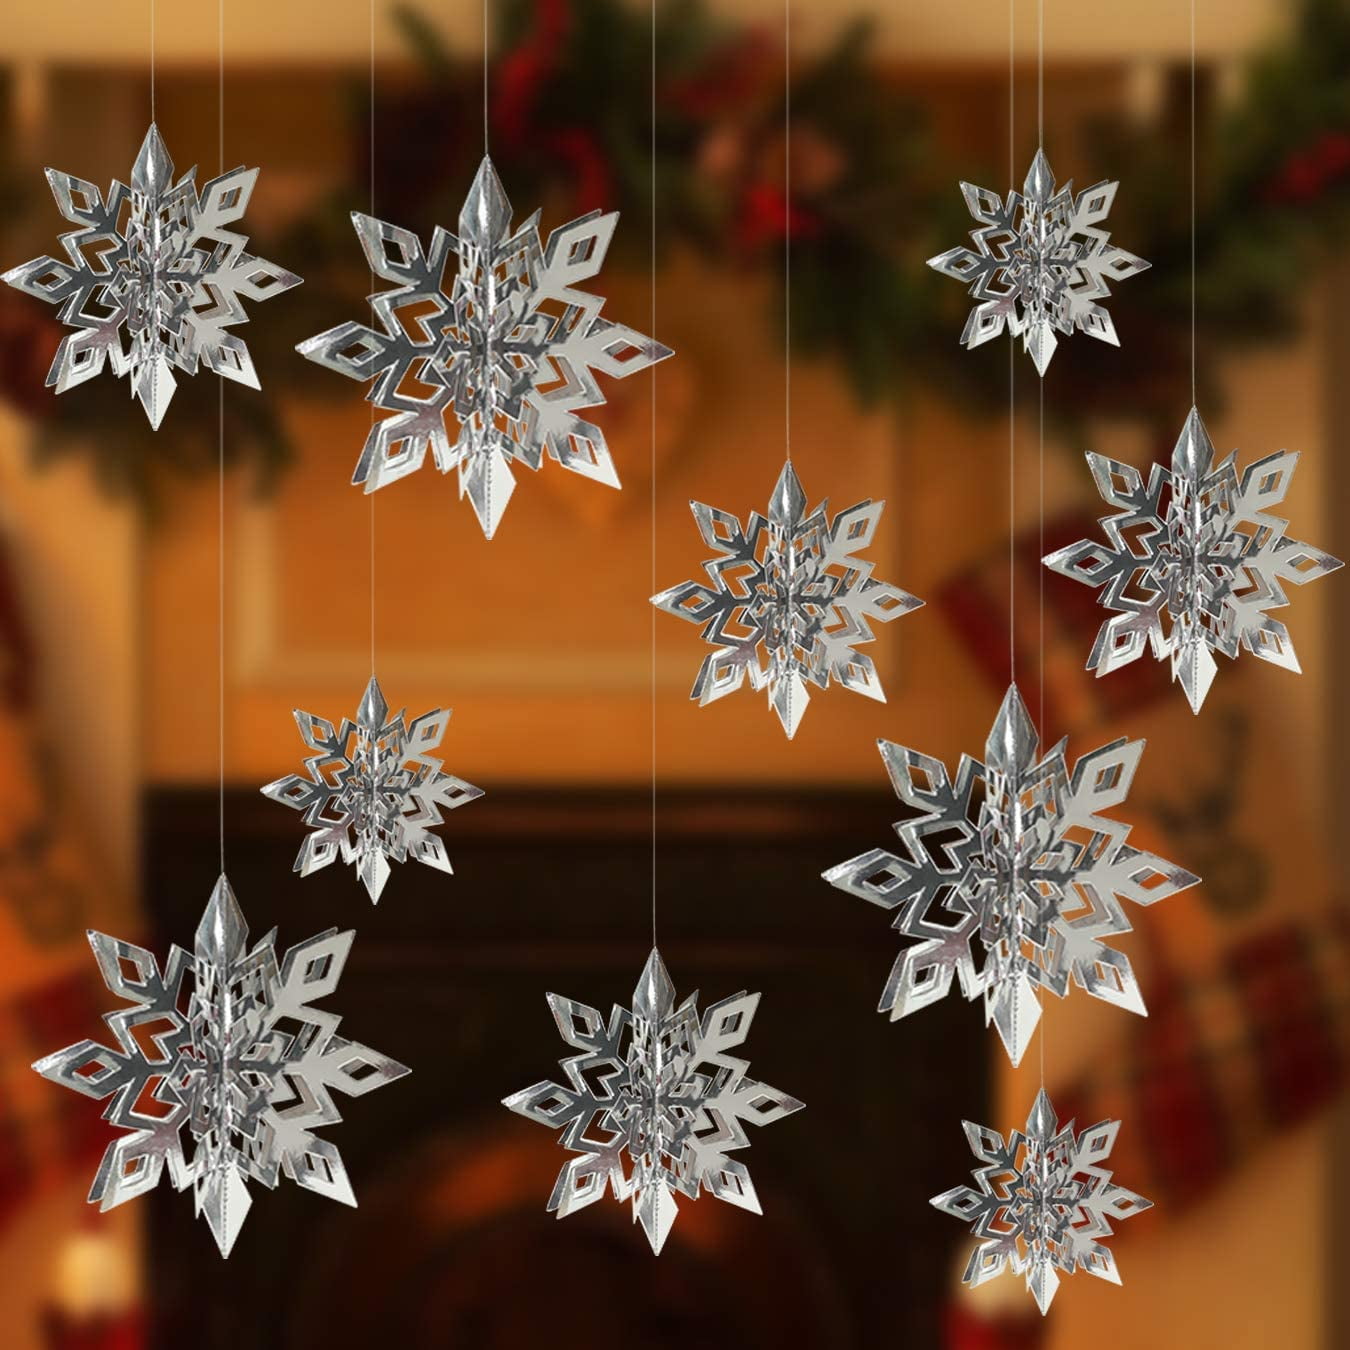 18Pcs 3D Hanging Christmas Snowflake Decorations, Large Silver Paper ...